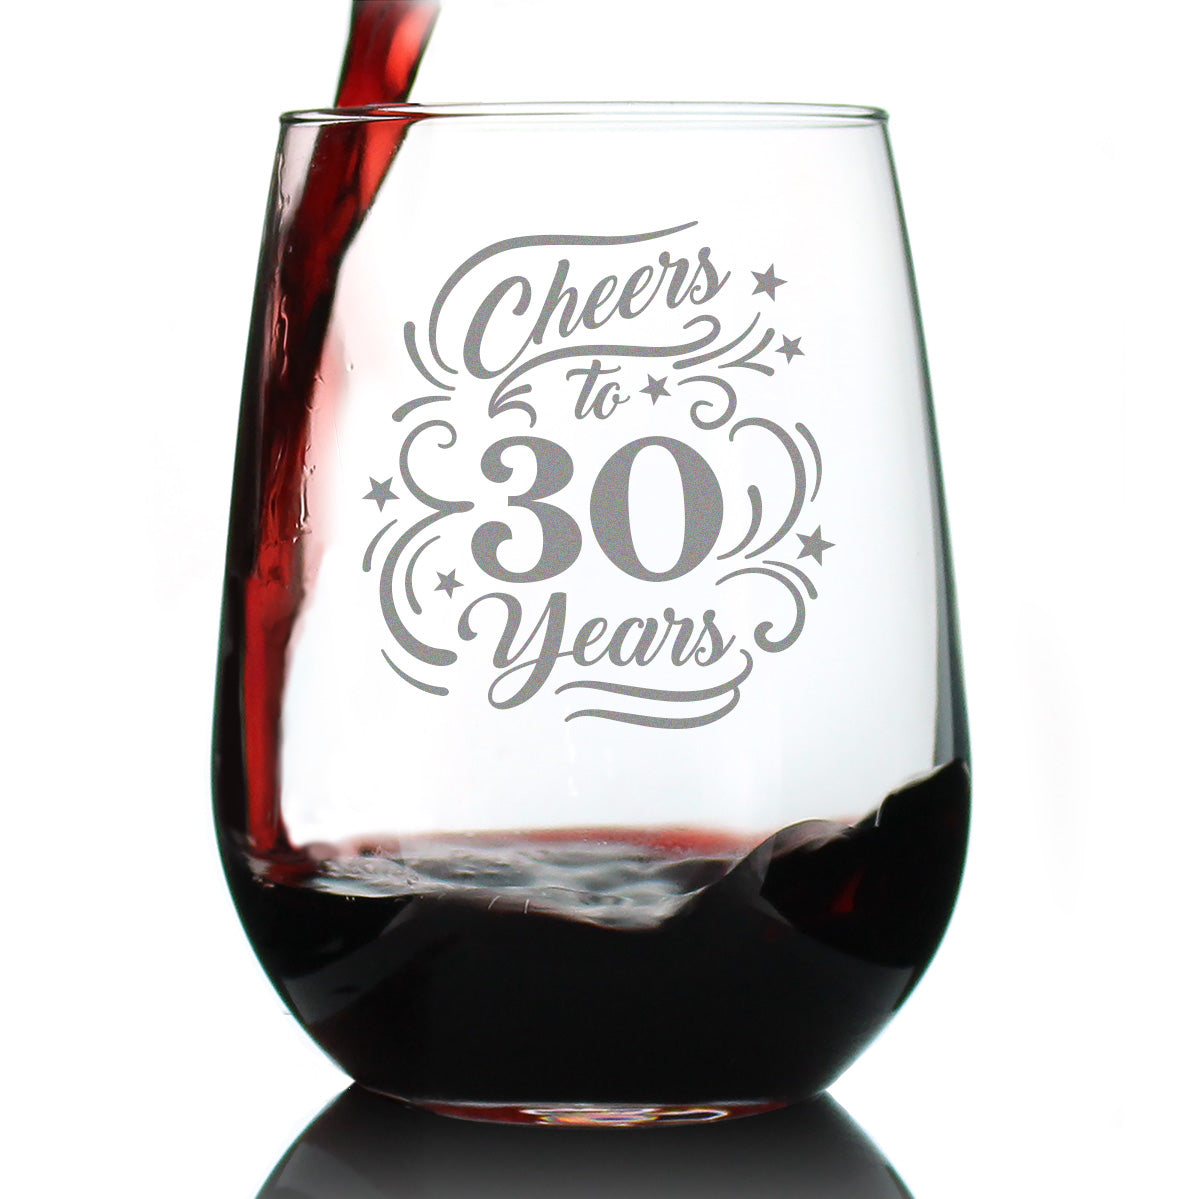 Cheers to 30 Years - Stemless Wine Glass Gifts for Women &amp; Men - 30th Anniversary or Birthday Party Decor - Large Glasses